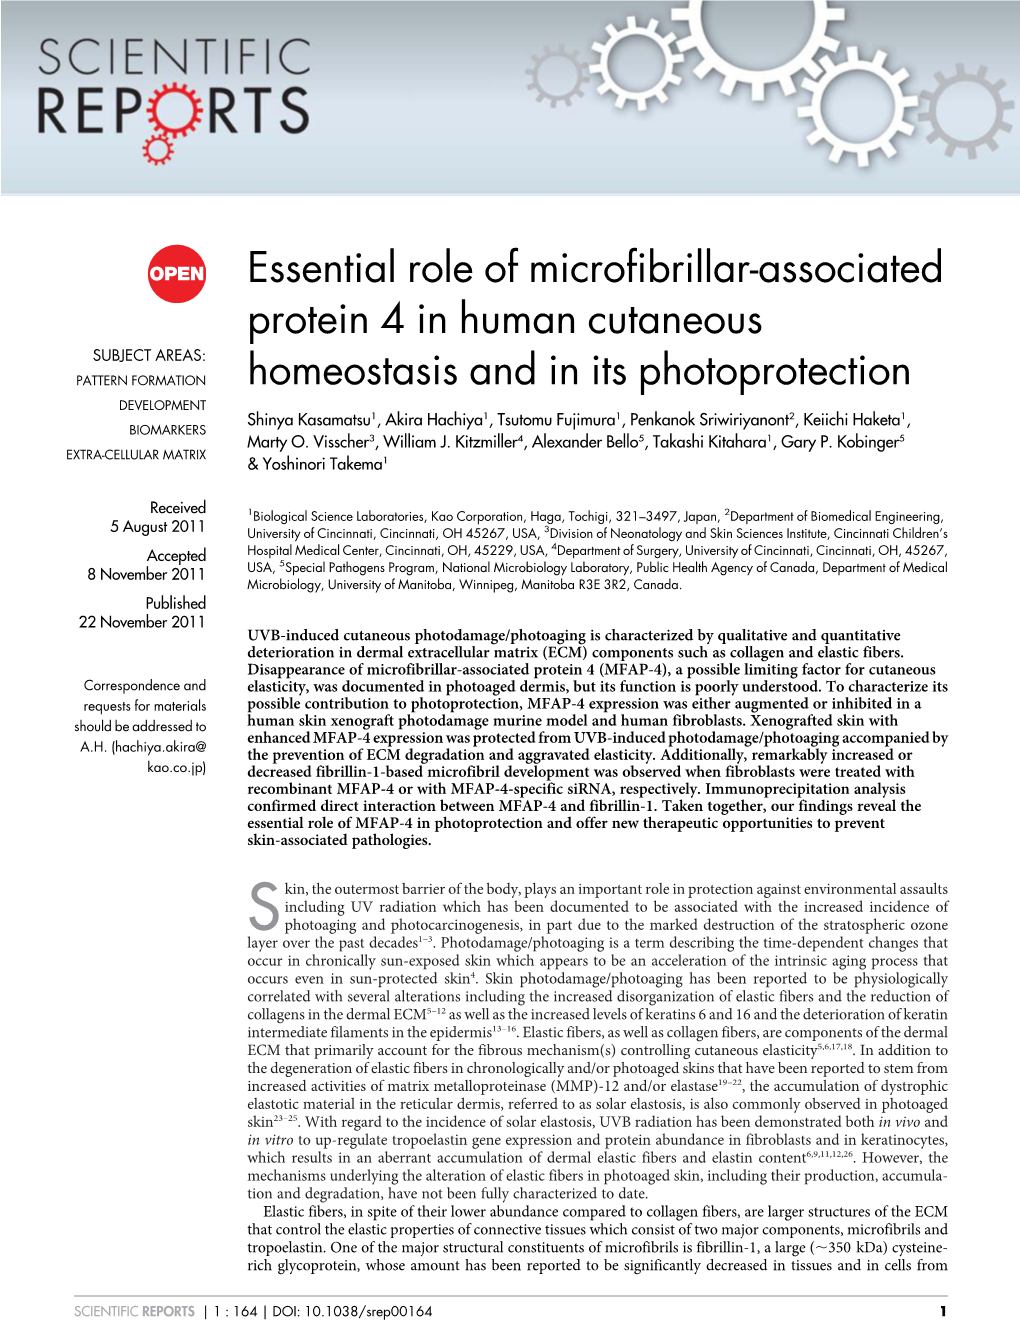 Essential Role of Microfibrillar-Associated Protein 4 In